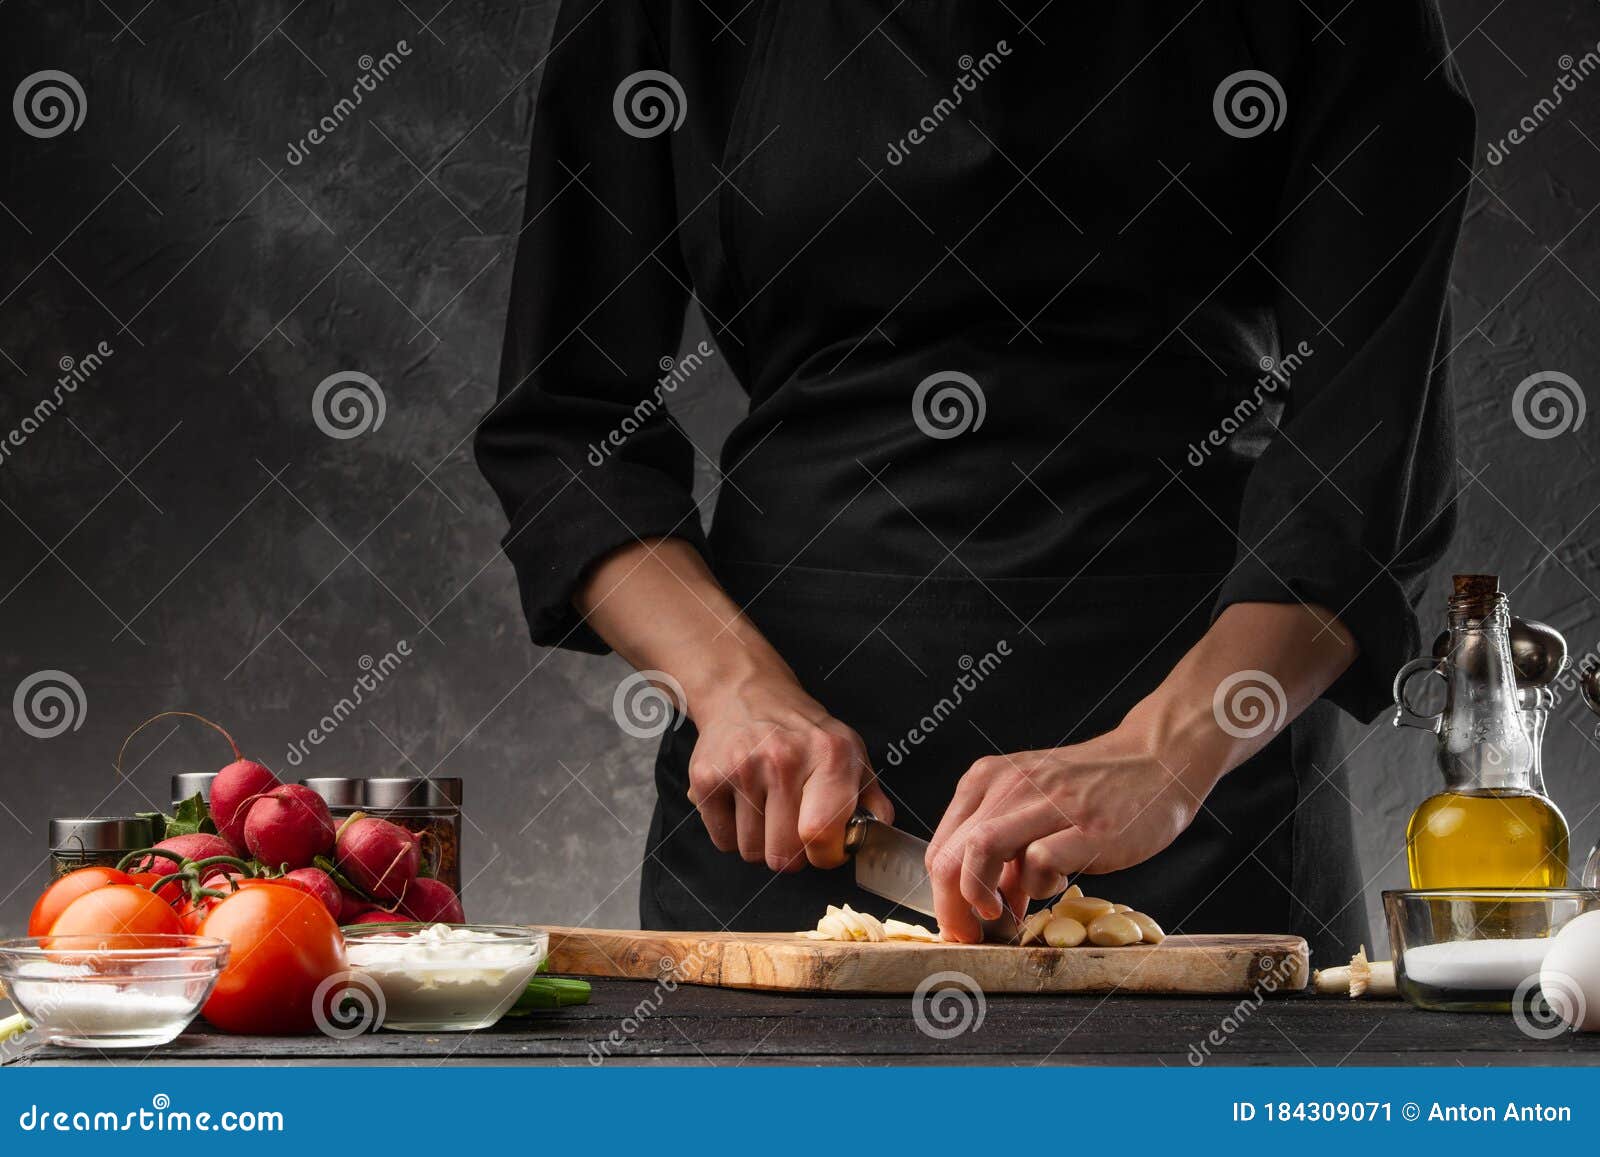 chef chopping garlic for cooking. against the background of a gray wall, and vegetables. cooking and recipe book